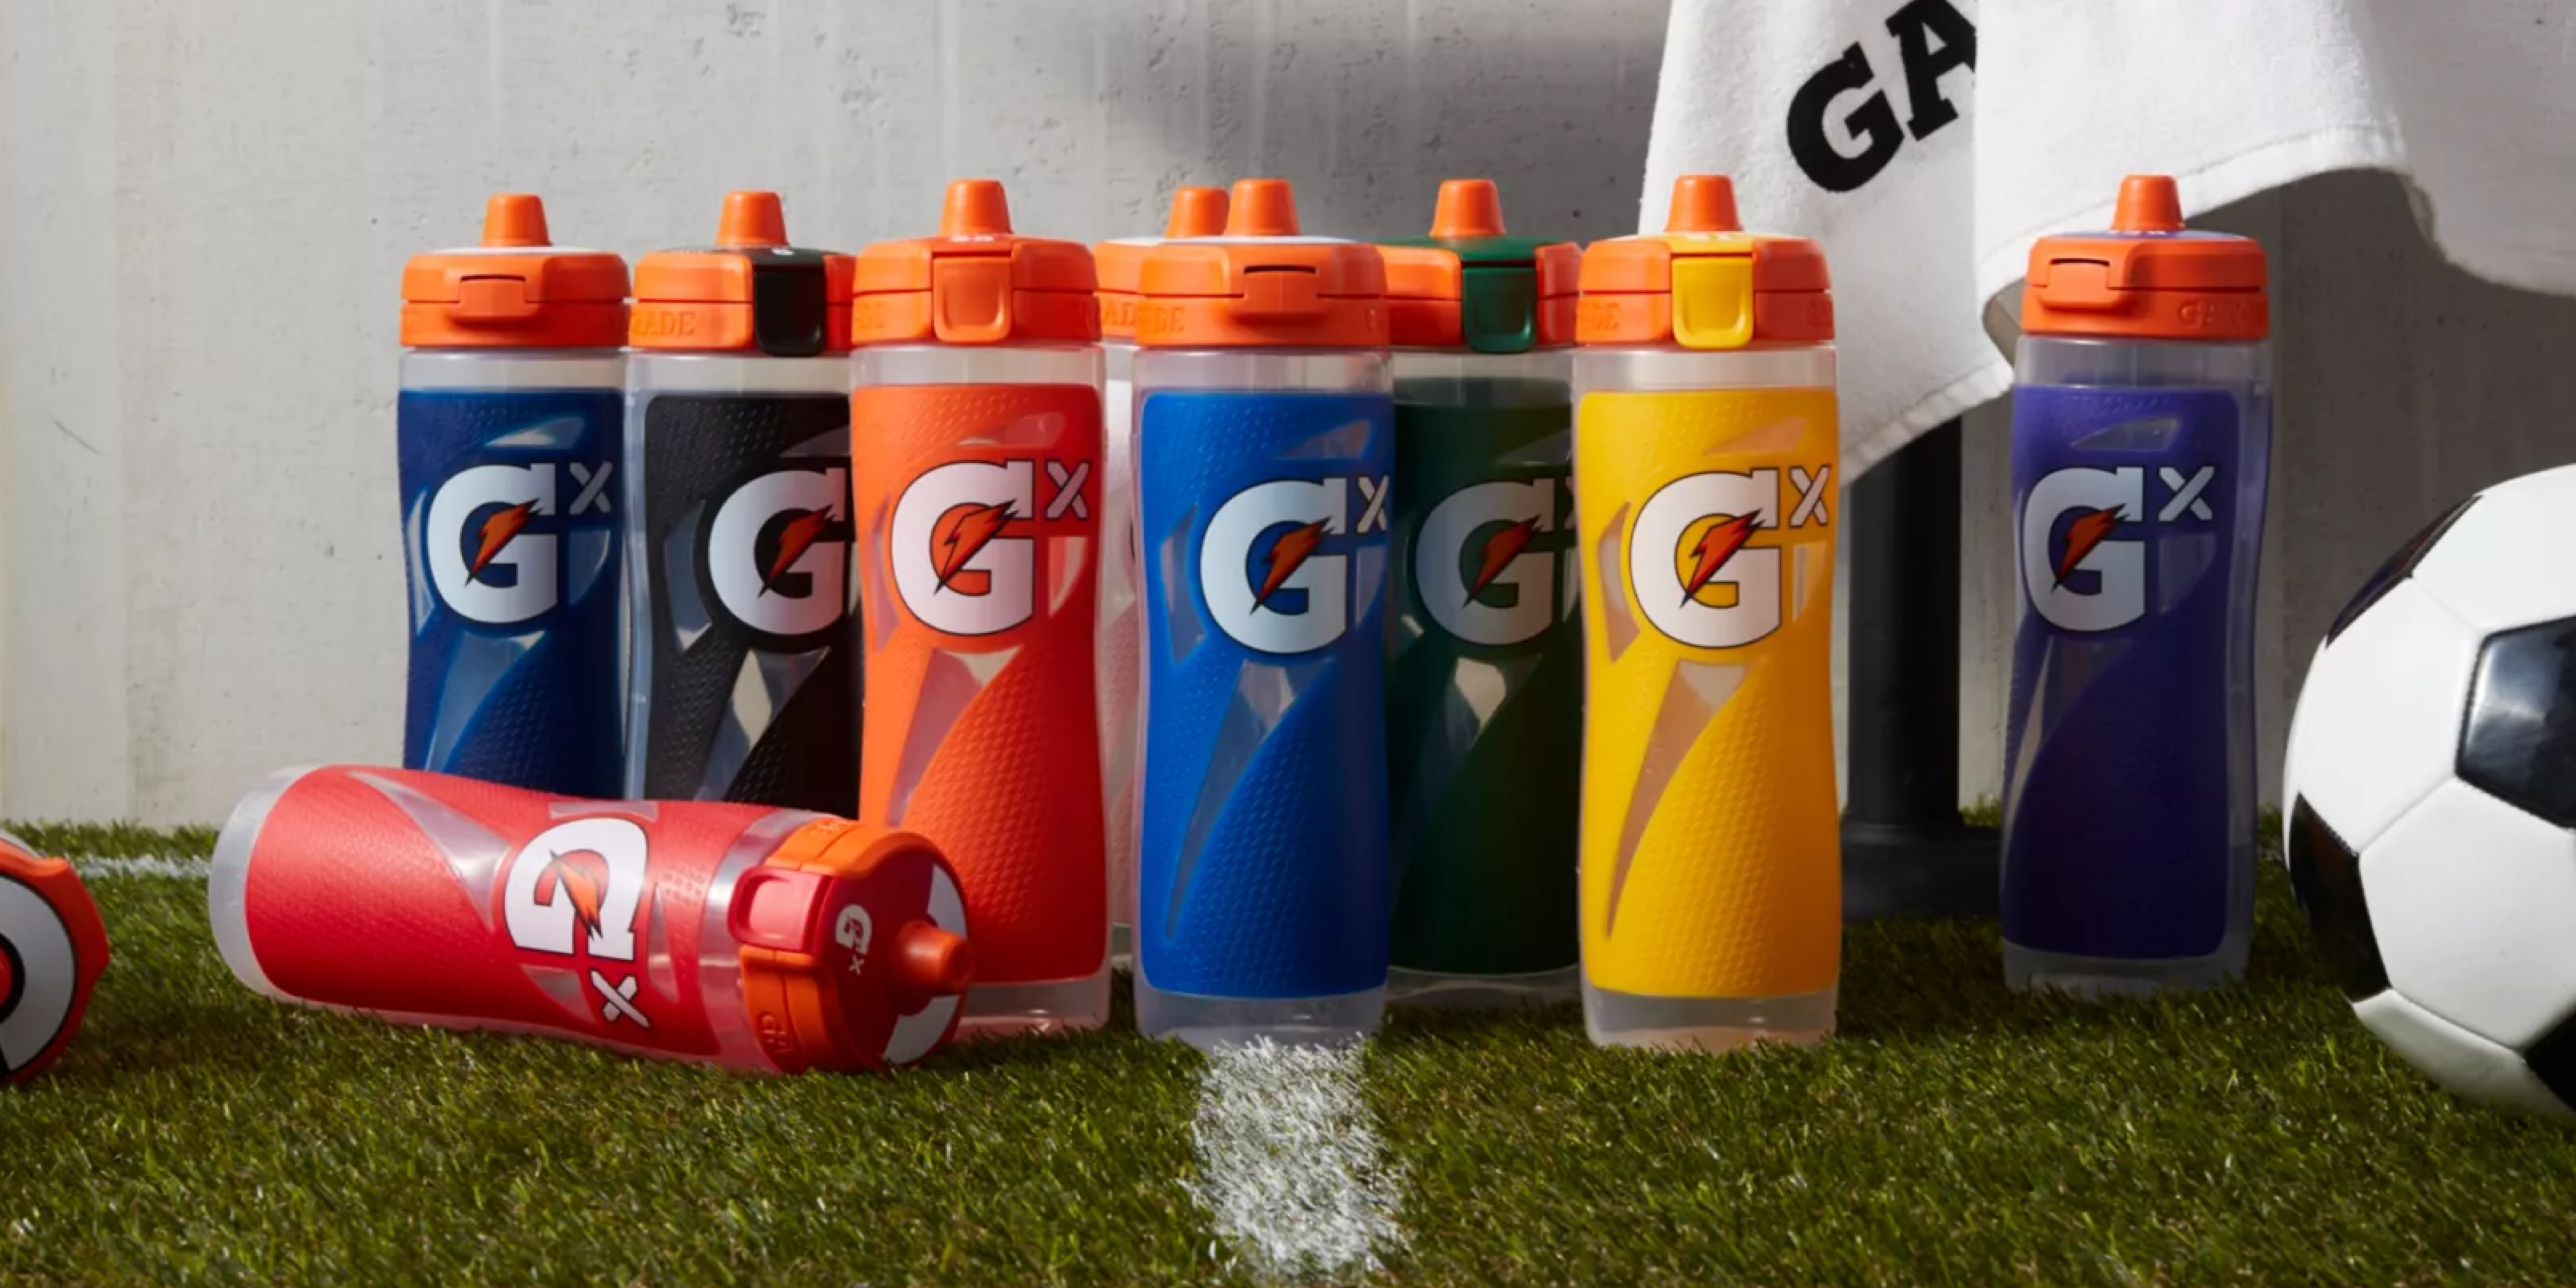 Gx Bottles in various colors on a soccer field